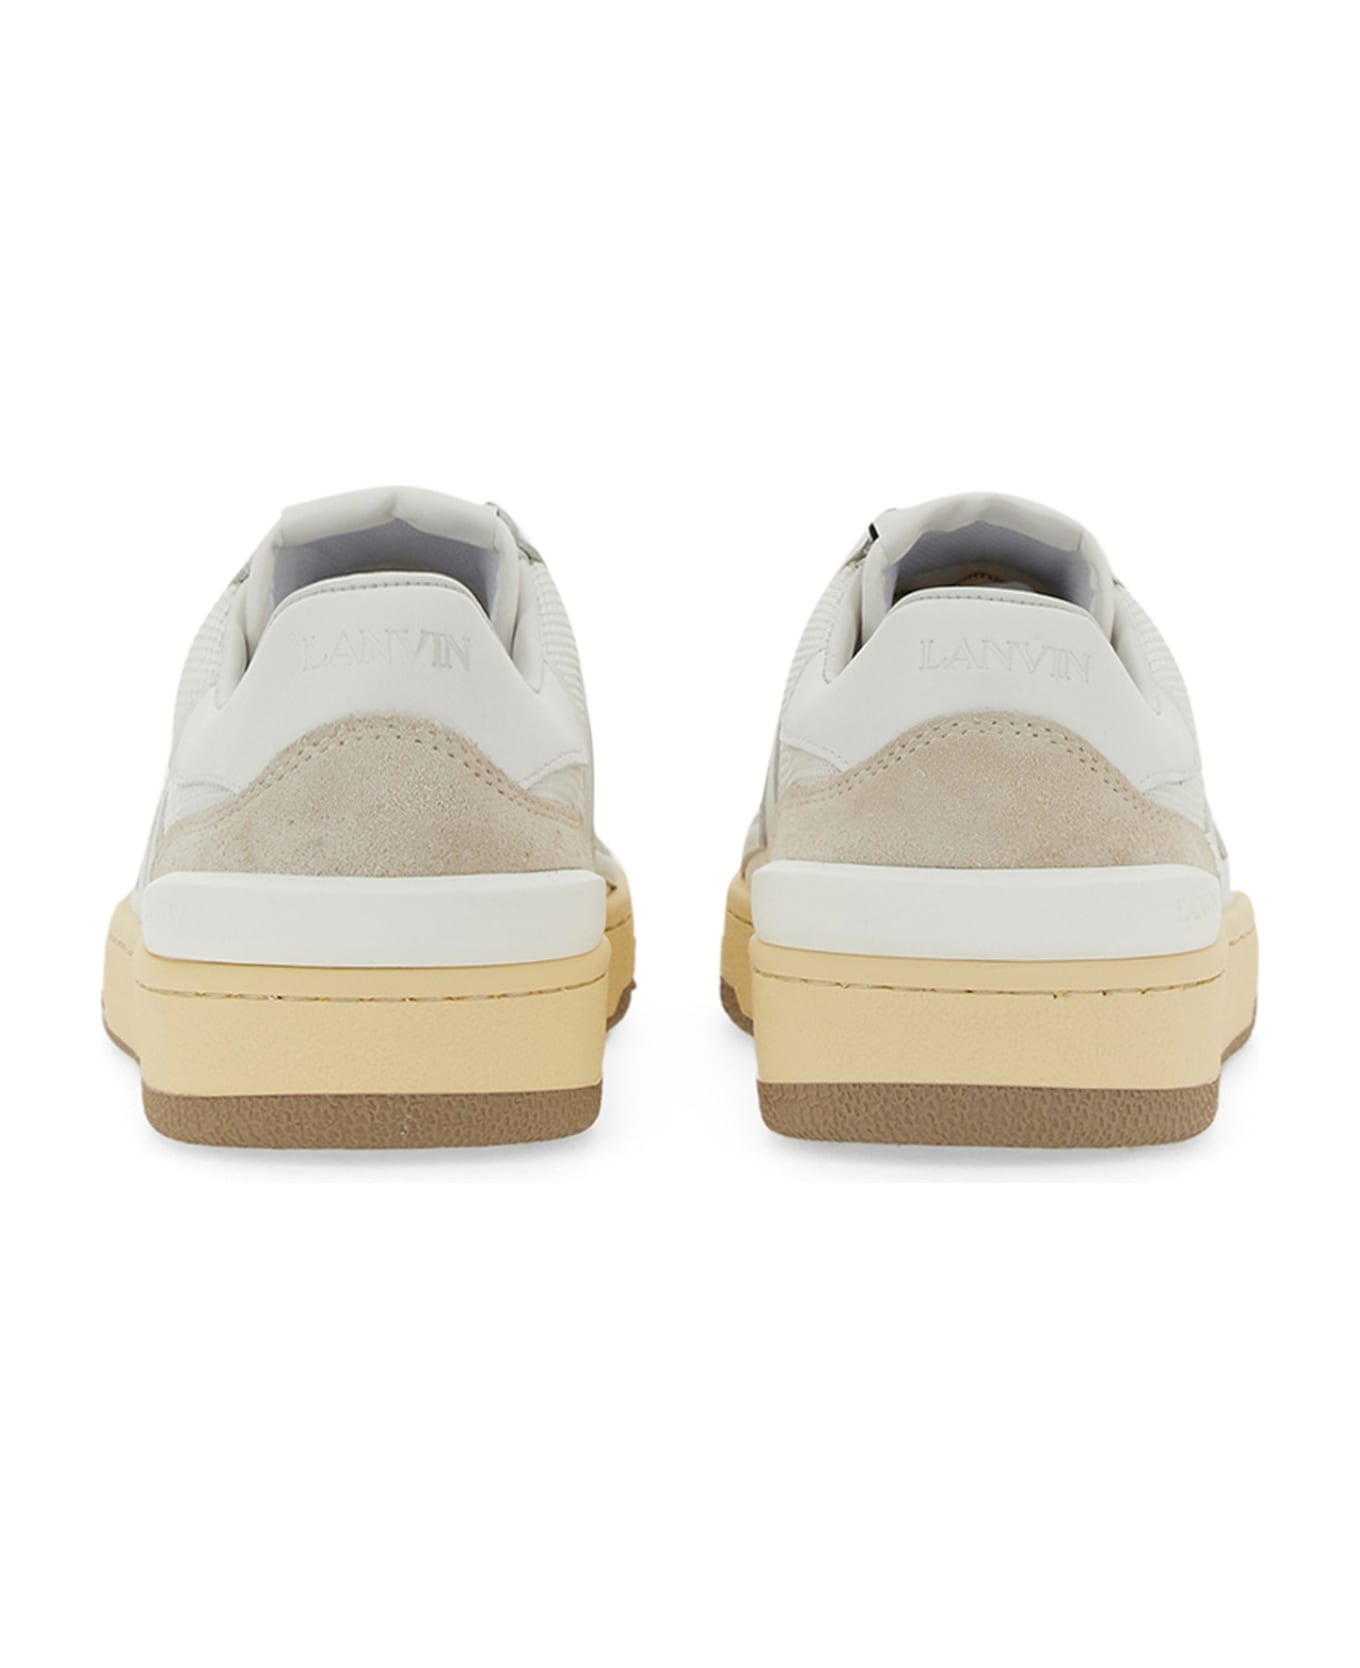 Lanvin Mesh, Suede And Nappa Leather Sneaker - Bianco スニーカー